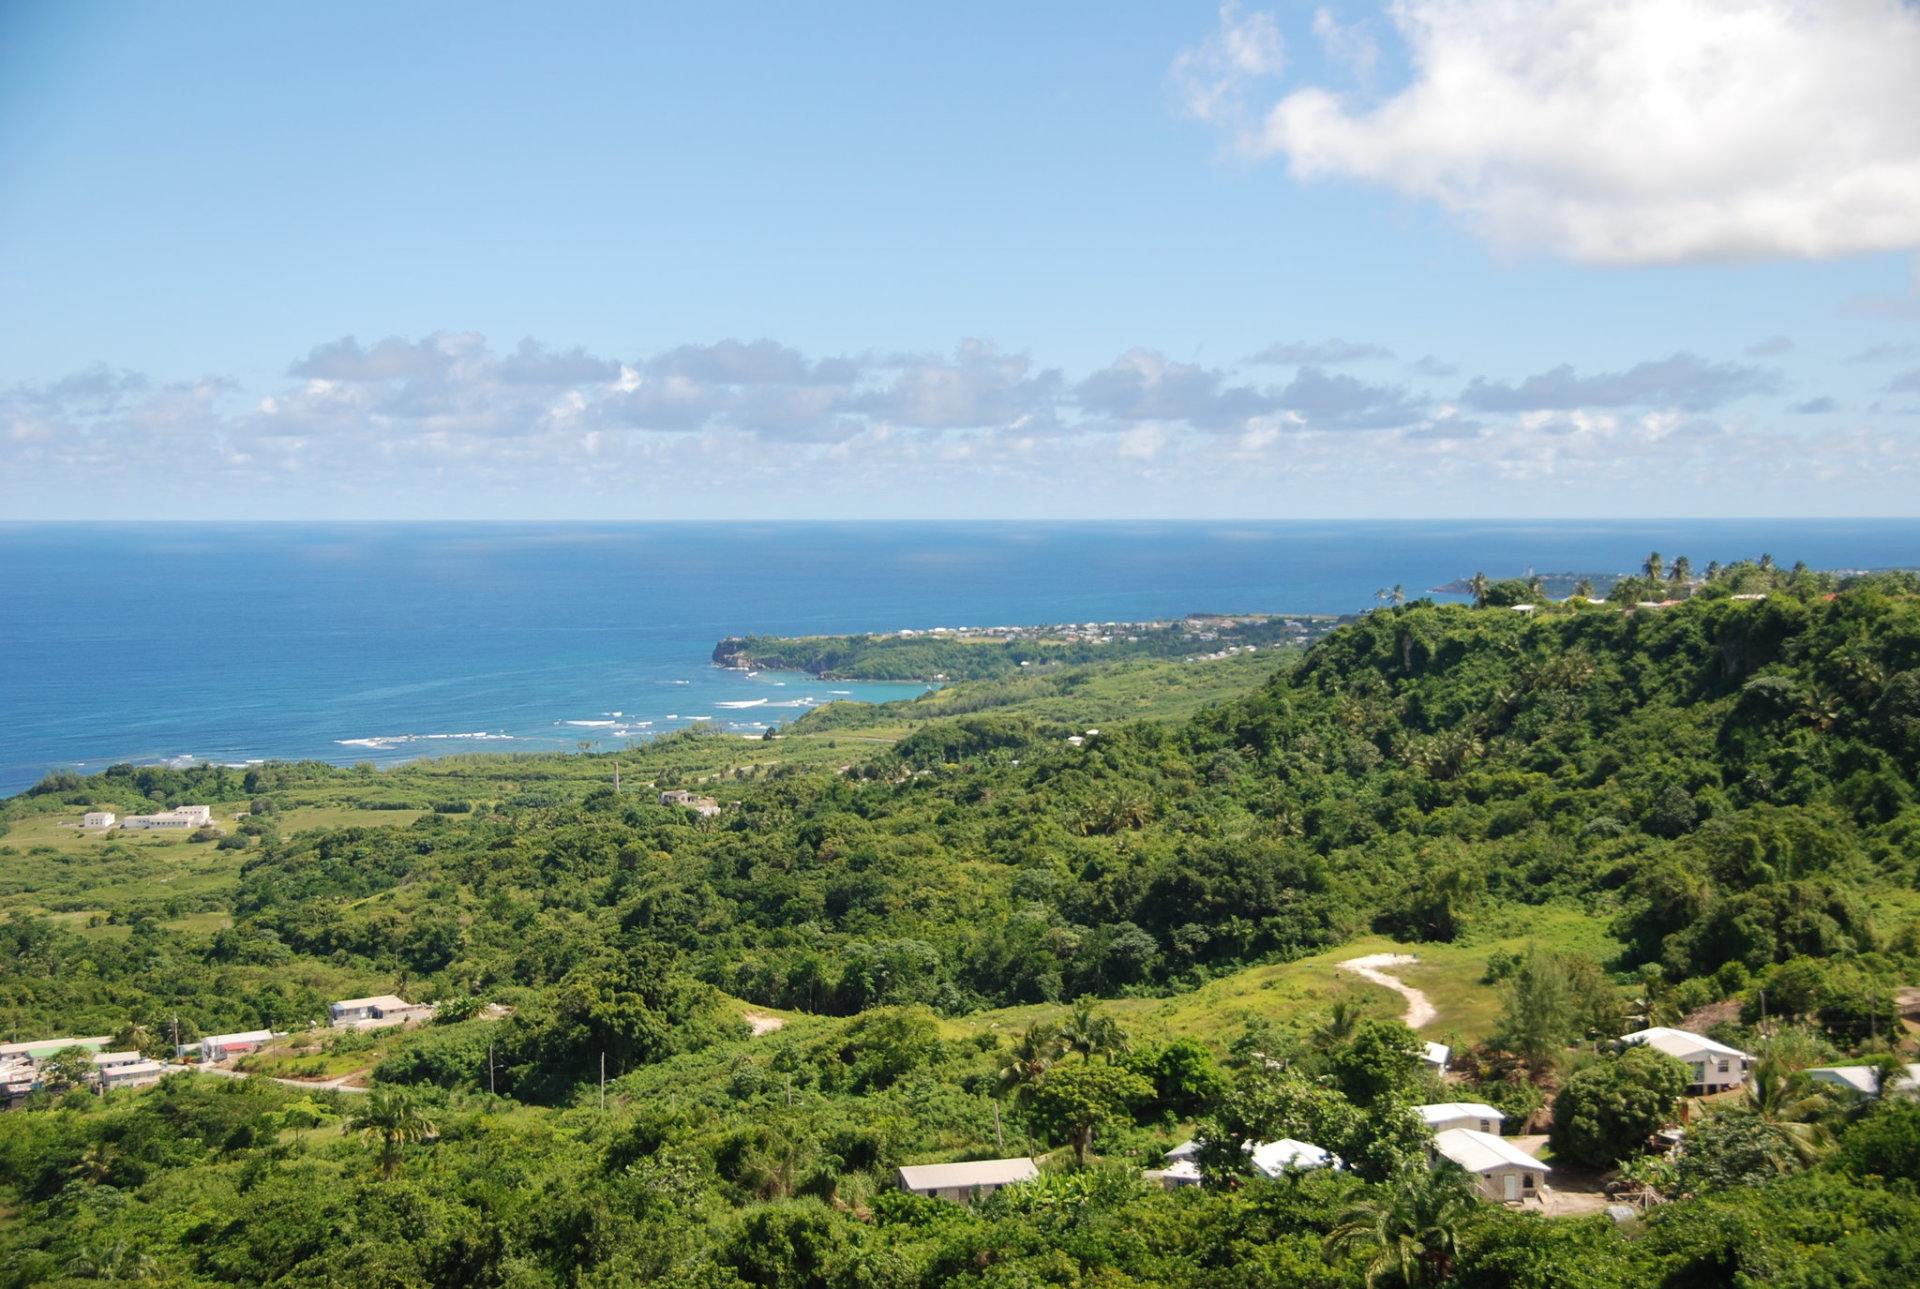 Hiking in Barbados